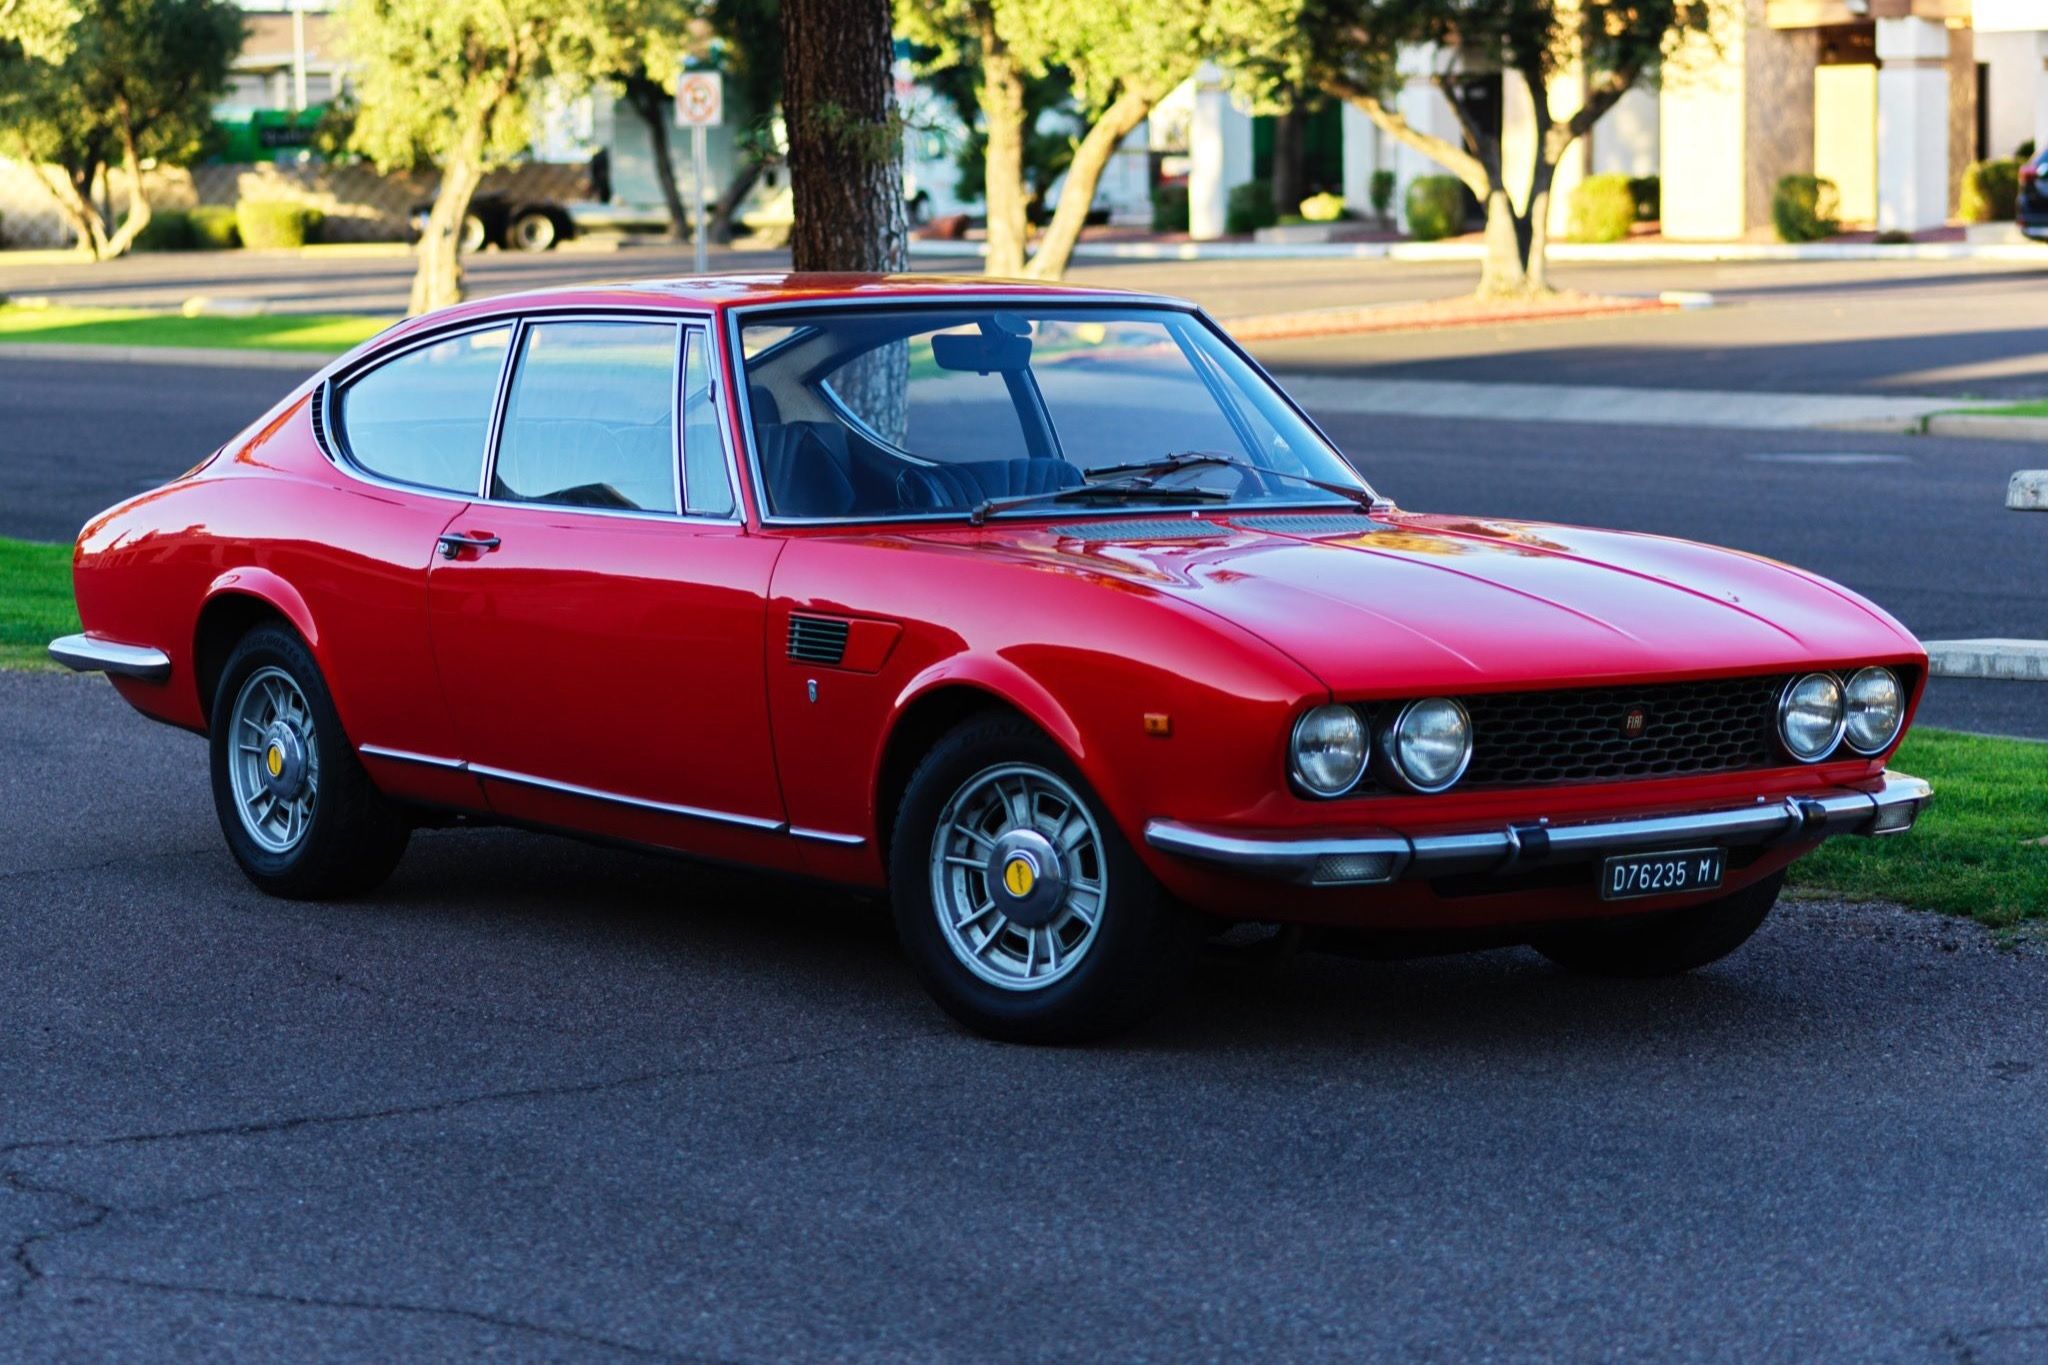 A 1967 red Fiat Dino stands parallel parked on a road.